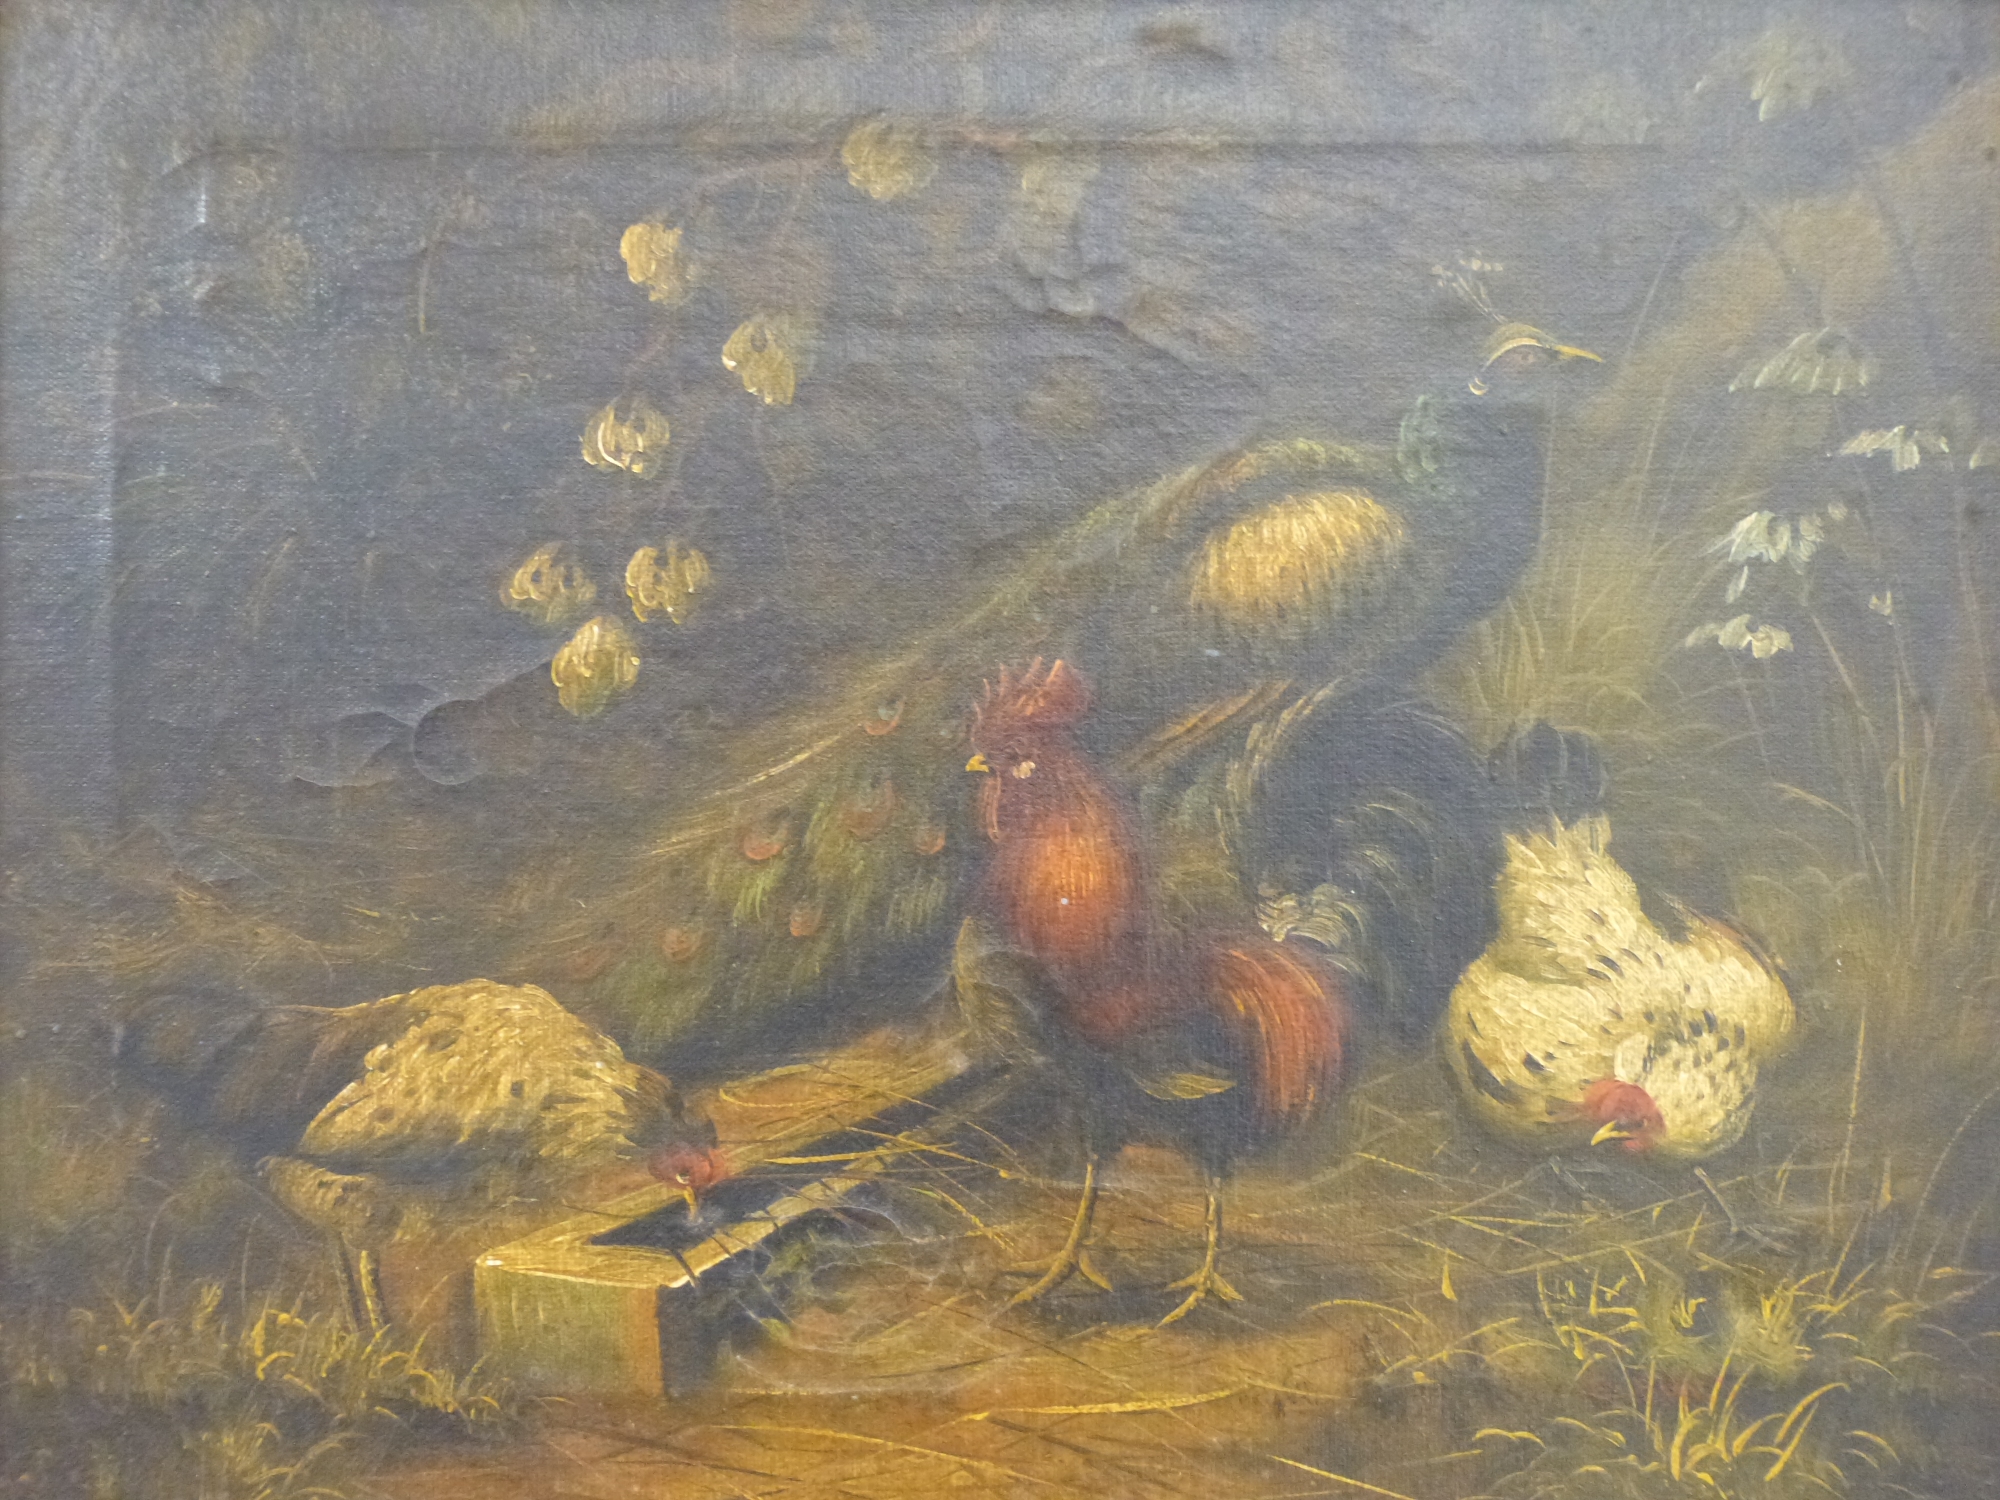 19thC style oil on canvas peacock and chickens feeding,